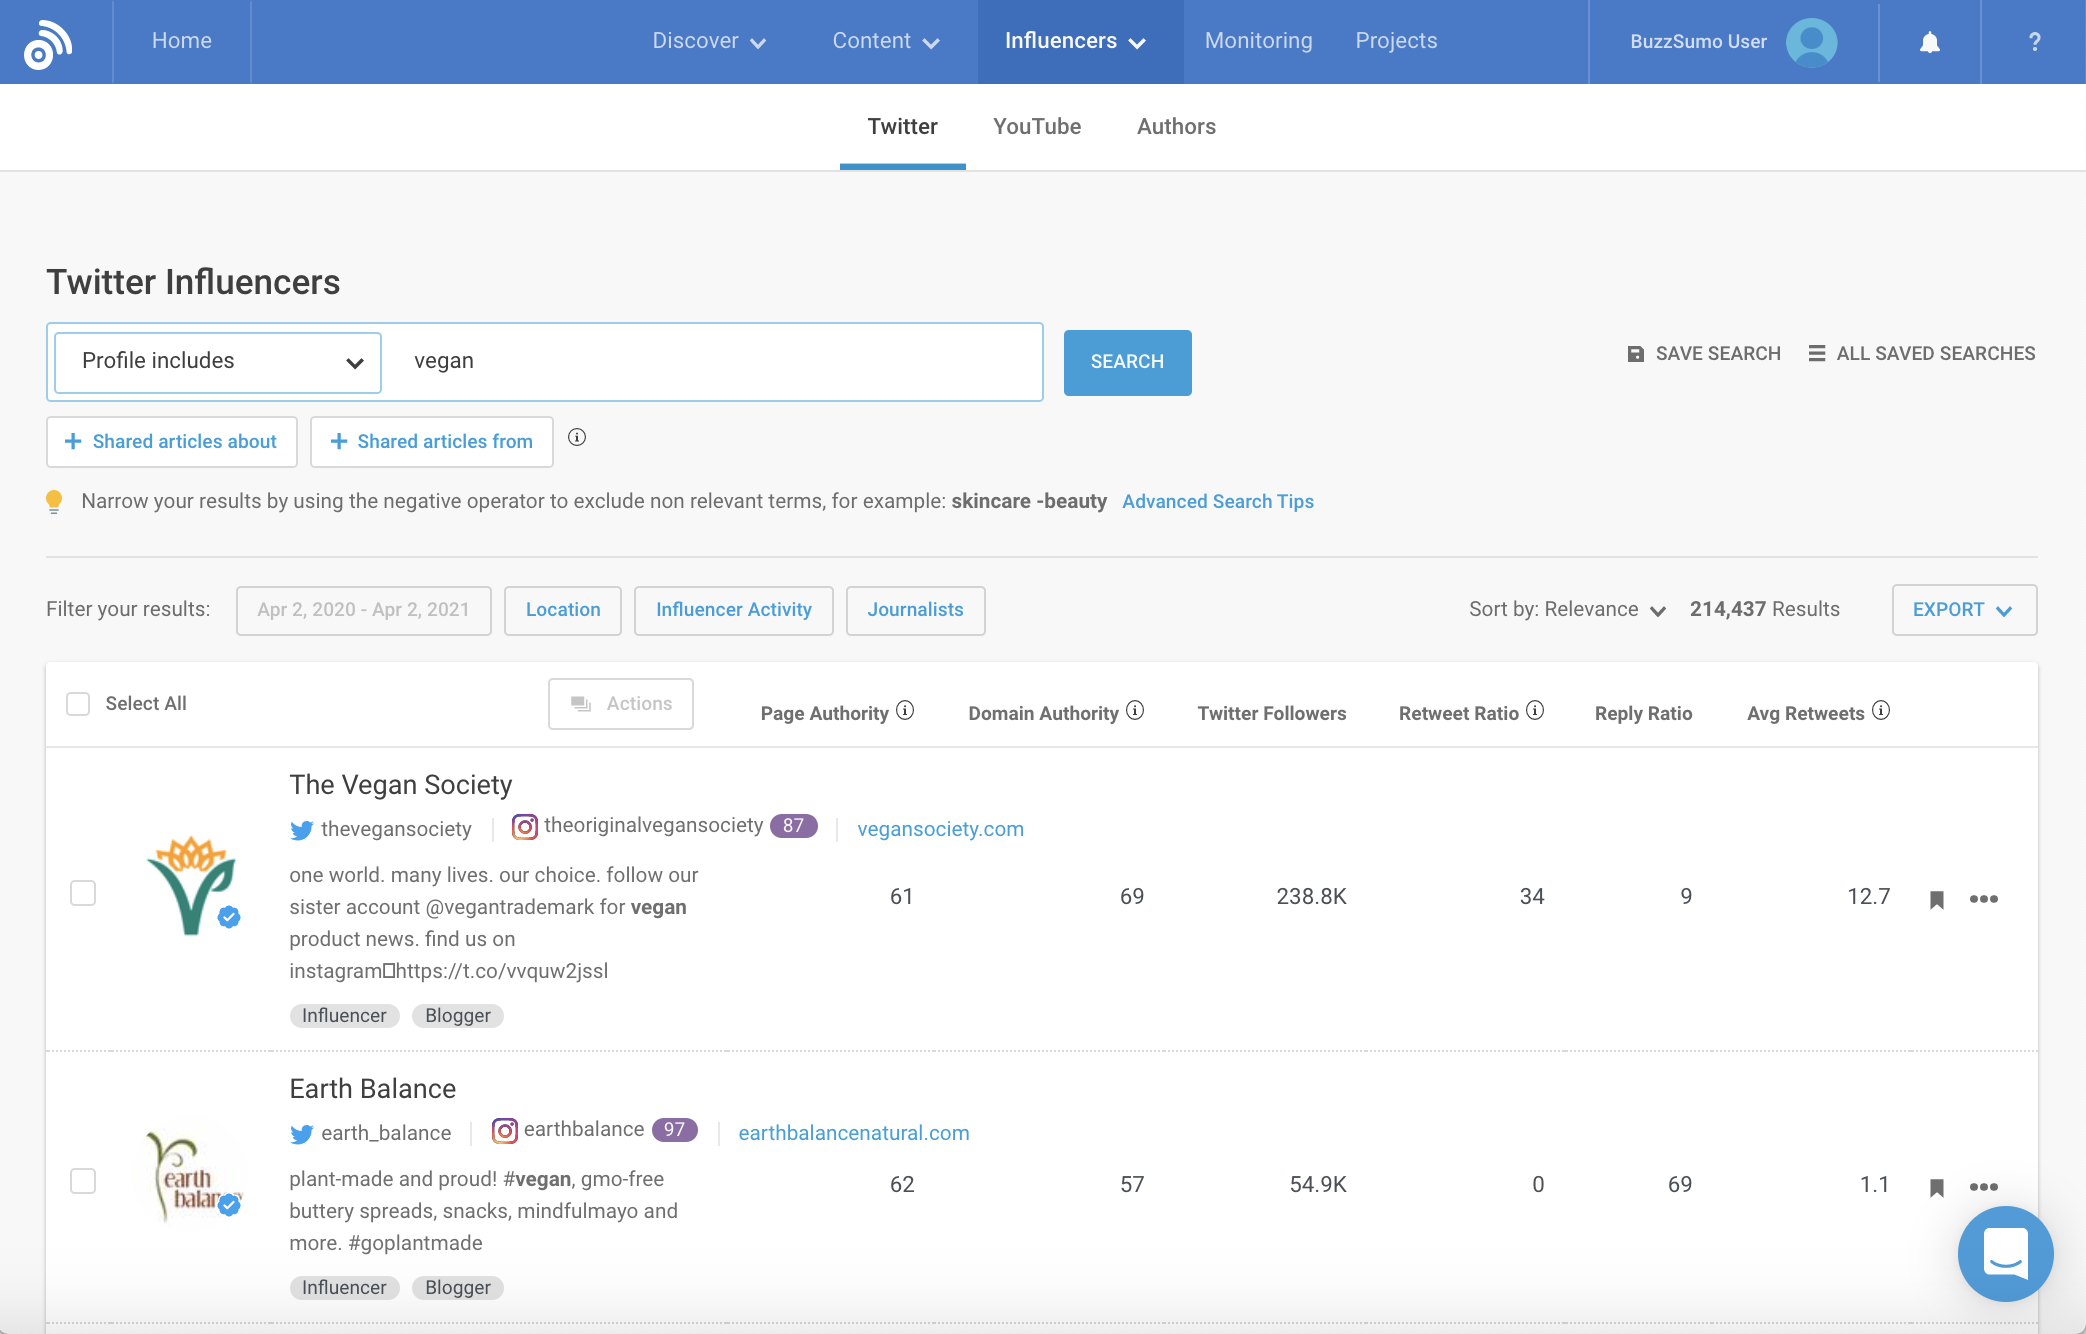 Influencer Search - Discover the accounts that influence your audience across Twitter, YouTube and the web. Use BuzzSumo’s new Journalists Tool to identify relevant journalists and make better media connections, faster.